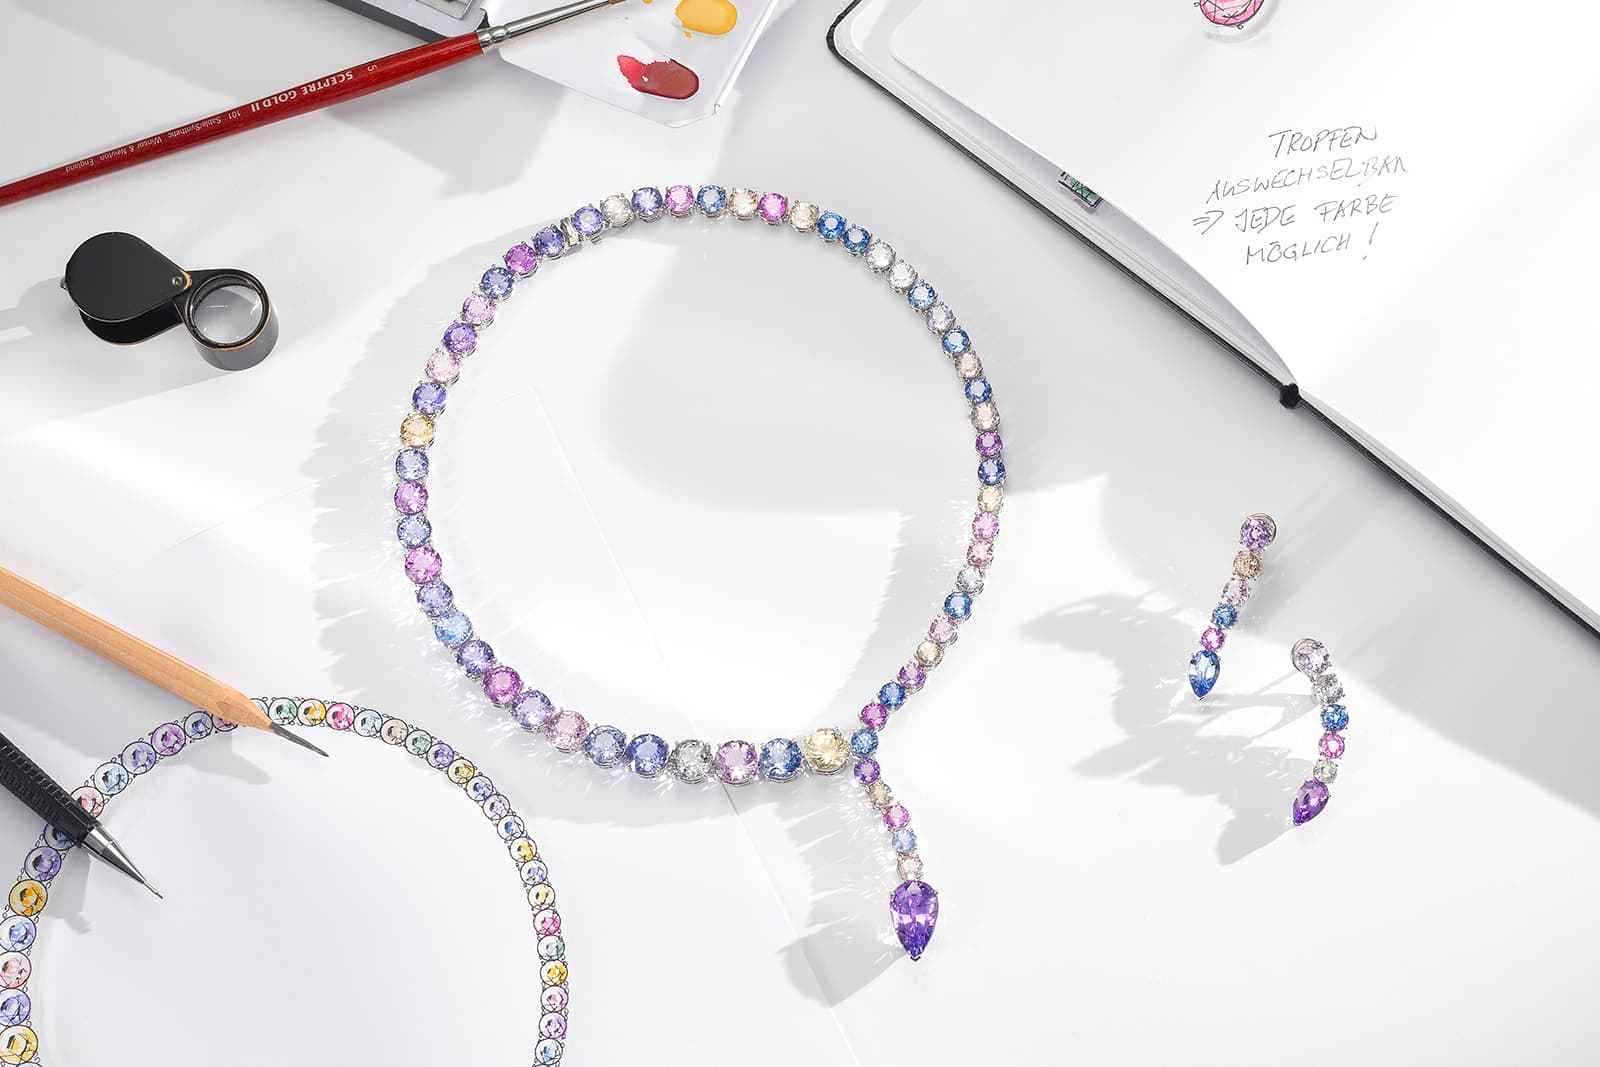 Designing the Bucherer Fine Jewellery Pastello Exceptional Waterfall necklace and matching earrings with natural fancy-coloured sapphires and a pear-shaped lavender sapphire of more than 11 carats